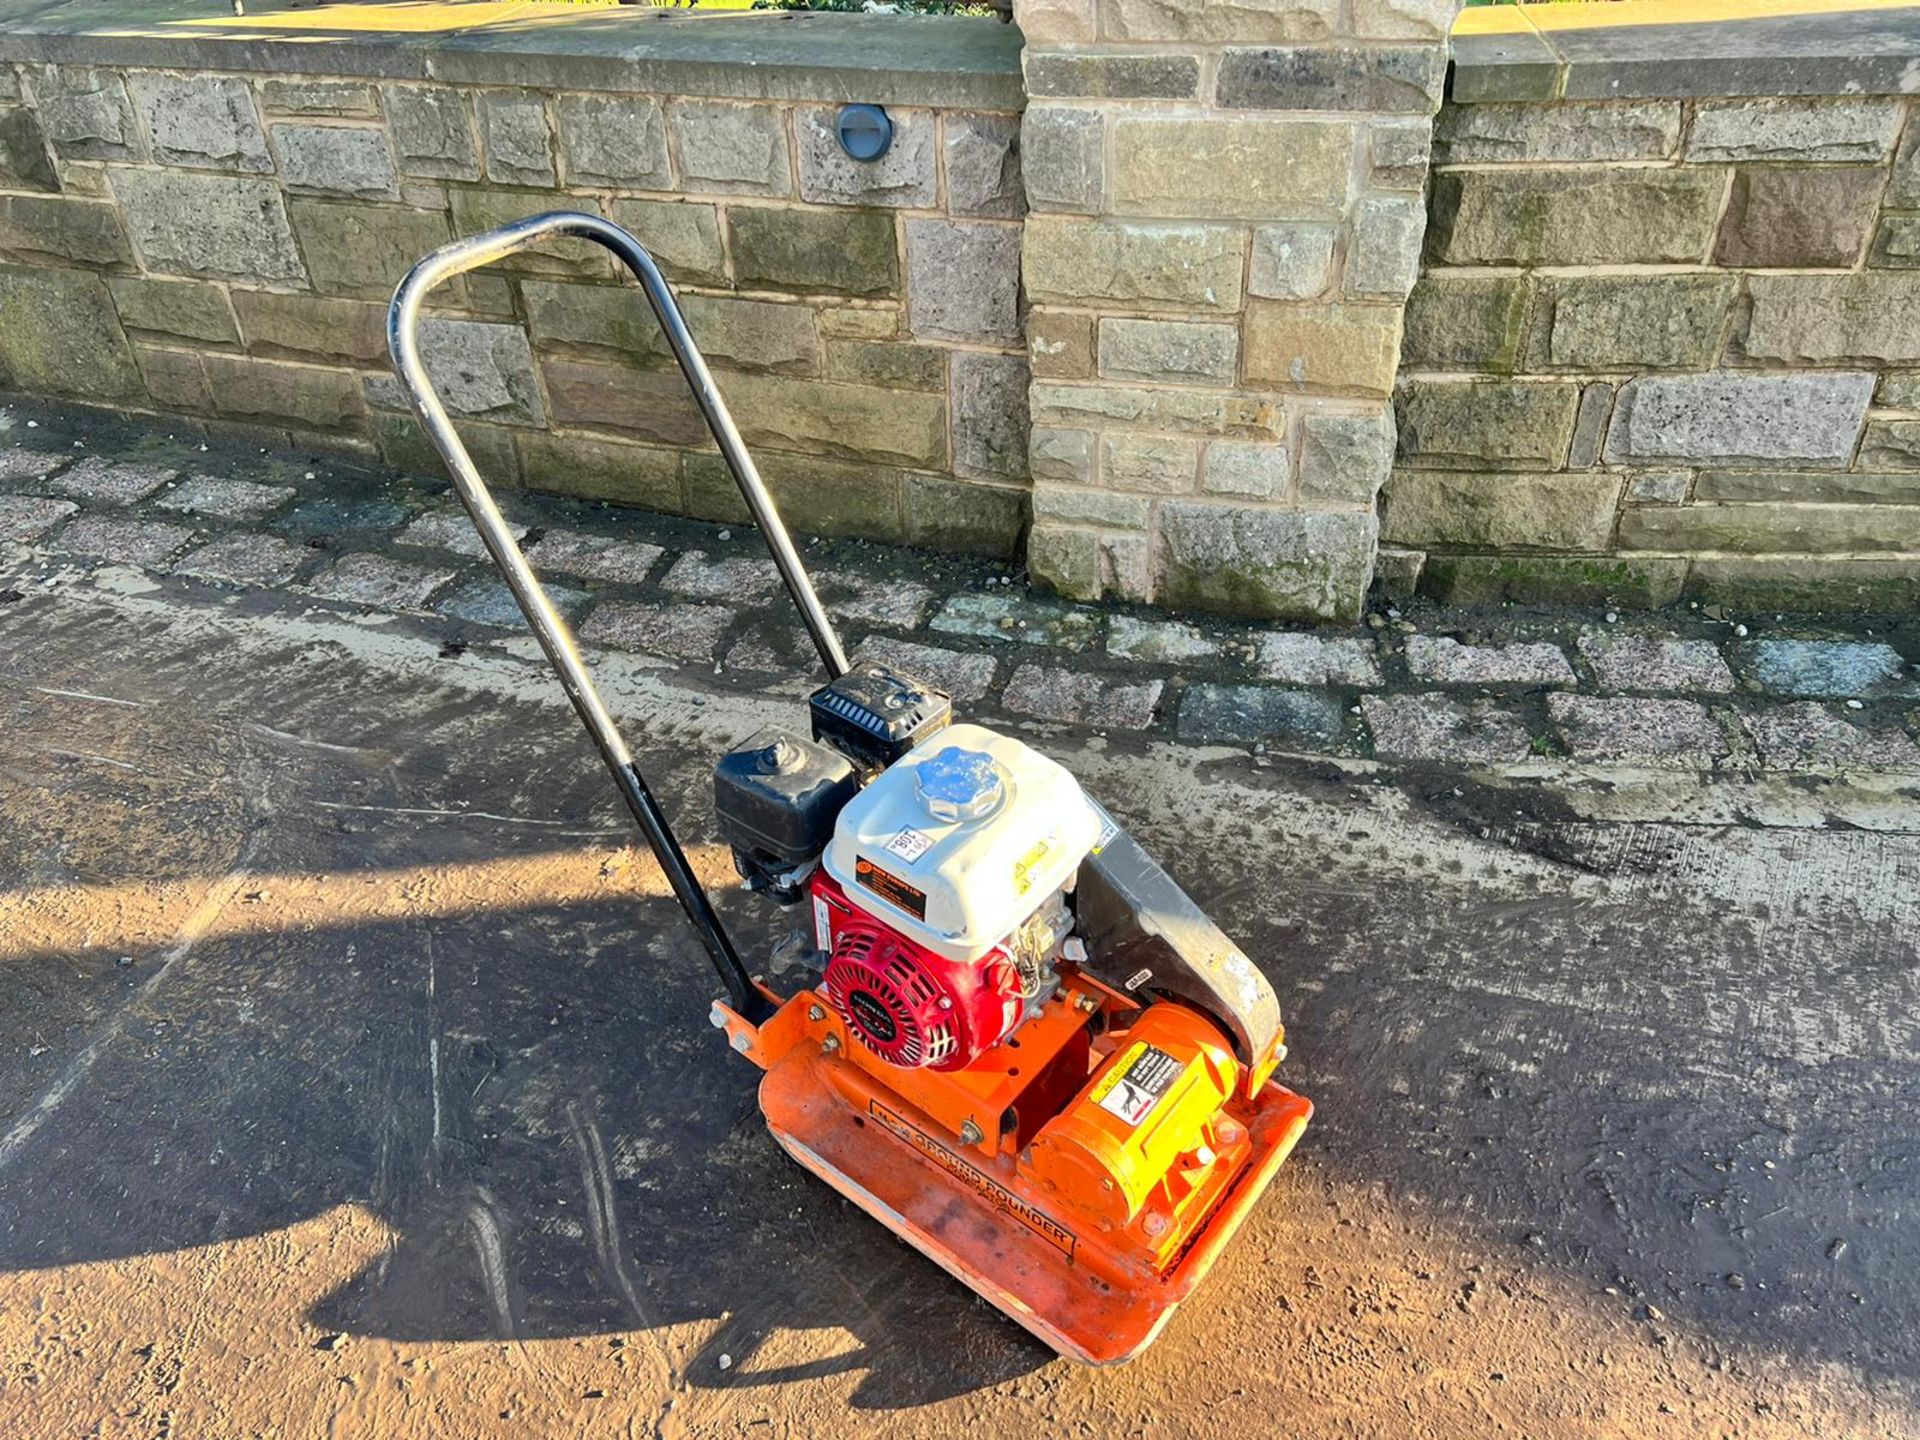 2021 MBW GP1600 WACKER PLATE, RUNS AND WORKS WELL, HONDA GX160 ENGINE, RRP OVER £950 NEW *PLUS VAT* - Image 2 of 9